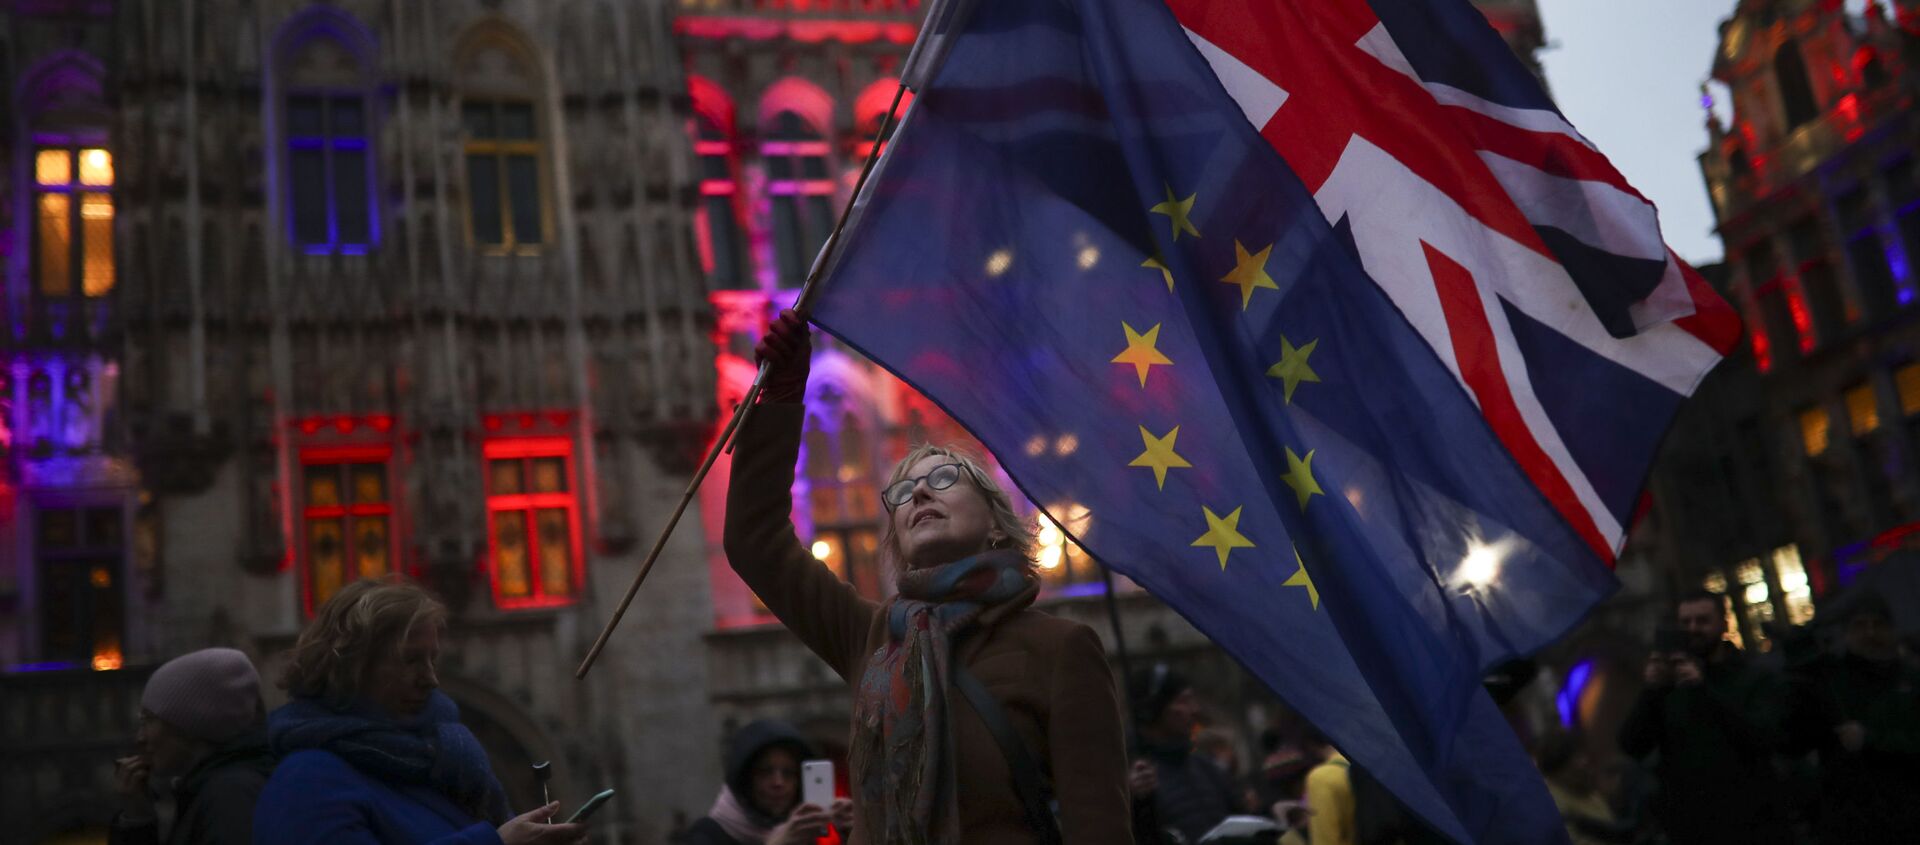 A woman holds up the Union and the European Union flags during an event called Brussels calling to celebrate the friendship between Belgium and Britain at the Grand Place in Brussels, Thursday, Jan. 30, 2020. - Sputnik International, 1920, 04.02.2021